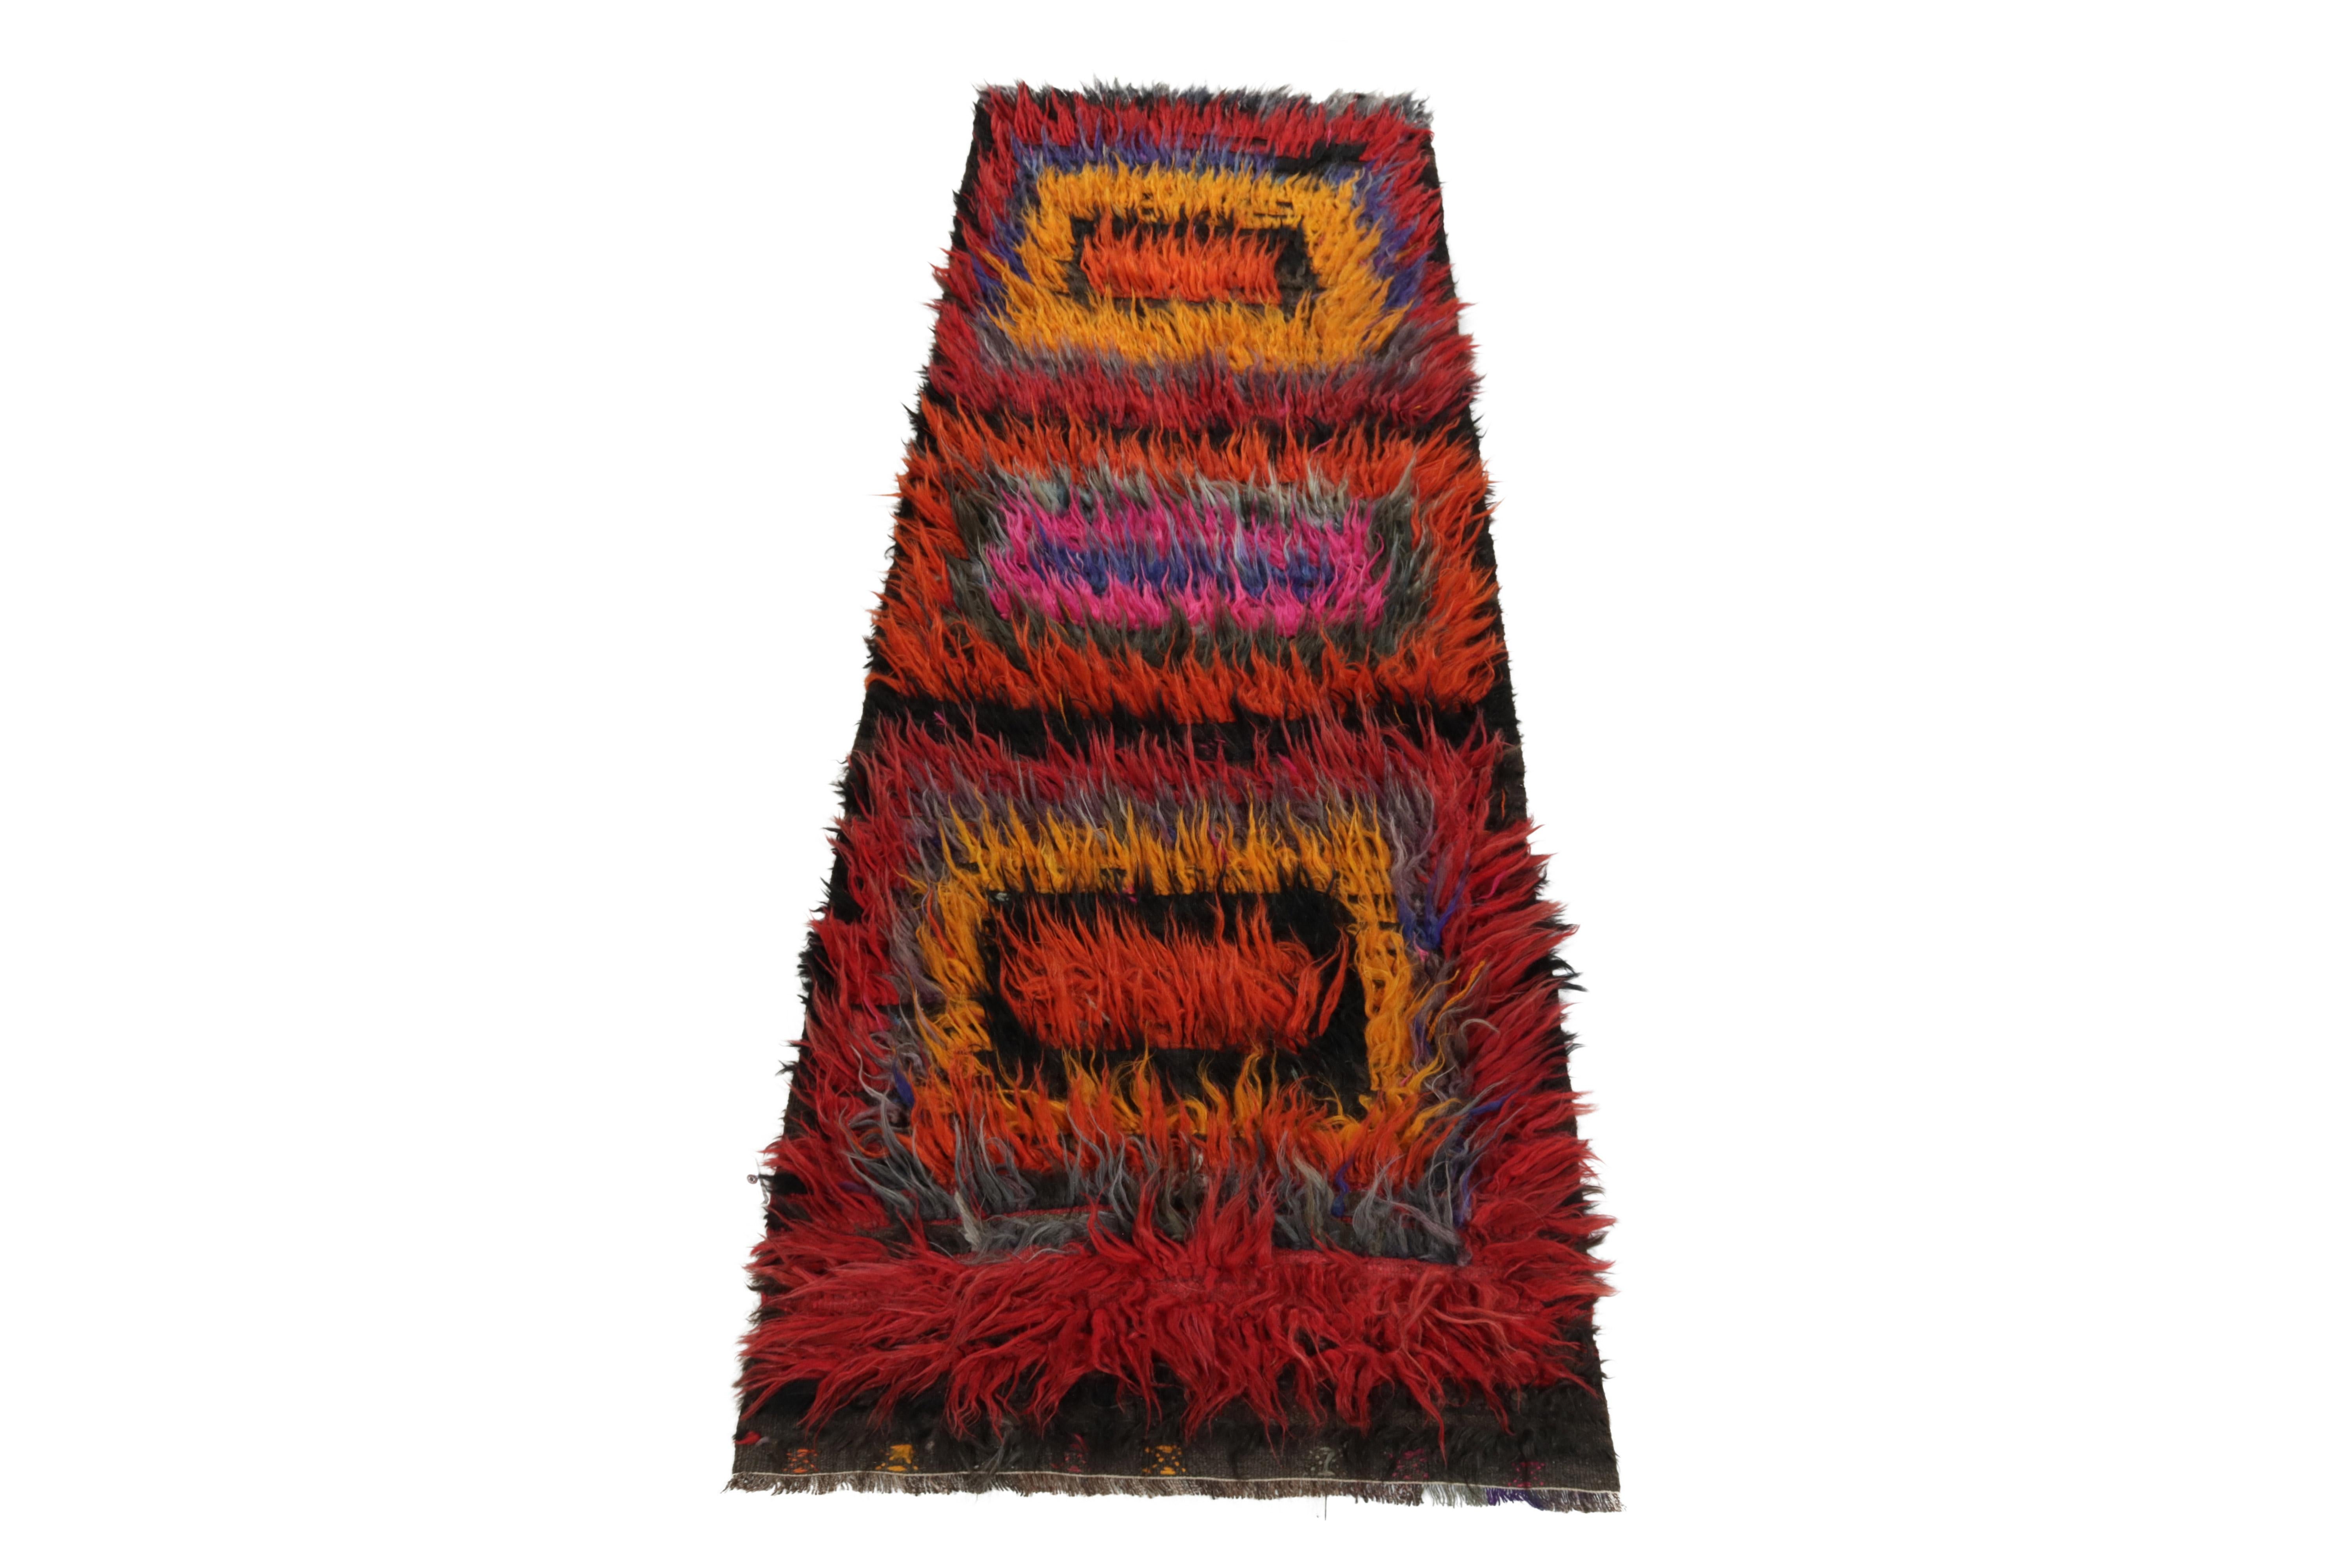 From Rug & Kilim’s vintage selections, a hand-knotted mid-century Tulu runner carrying a comforting high pile. Originating from Turkey circa 1950-1960, the rug enjoys a geometric pattern in hues of red, yellow, orange, blue & black further